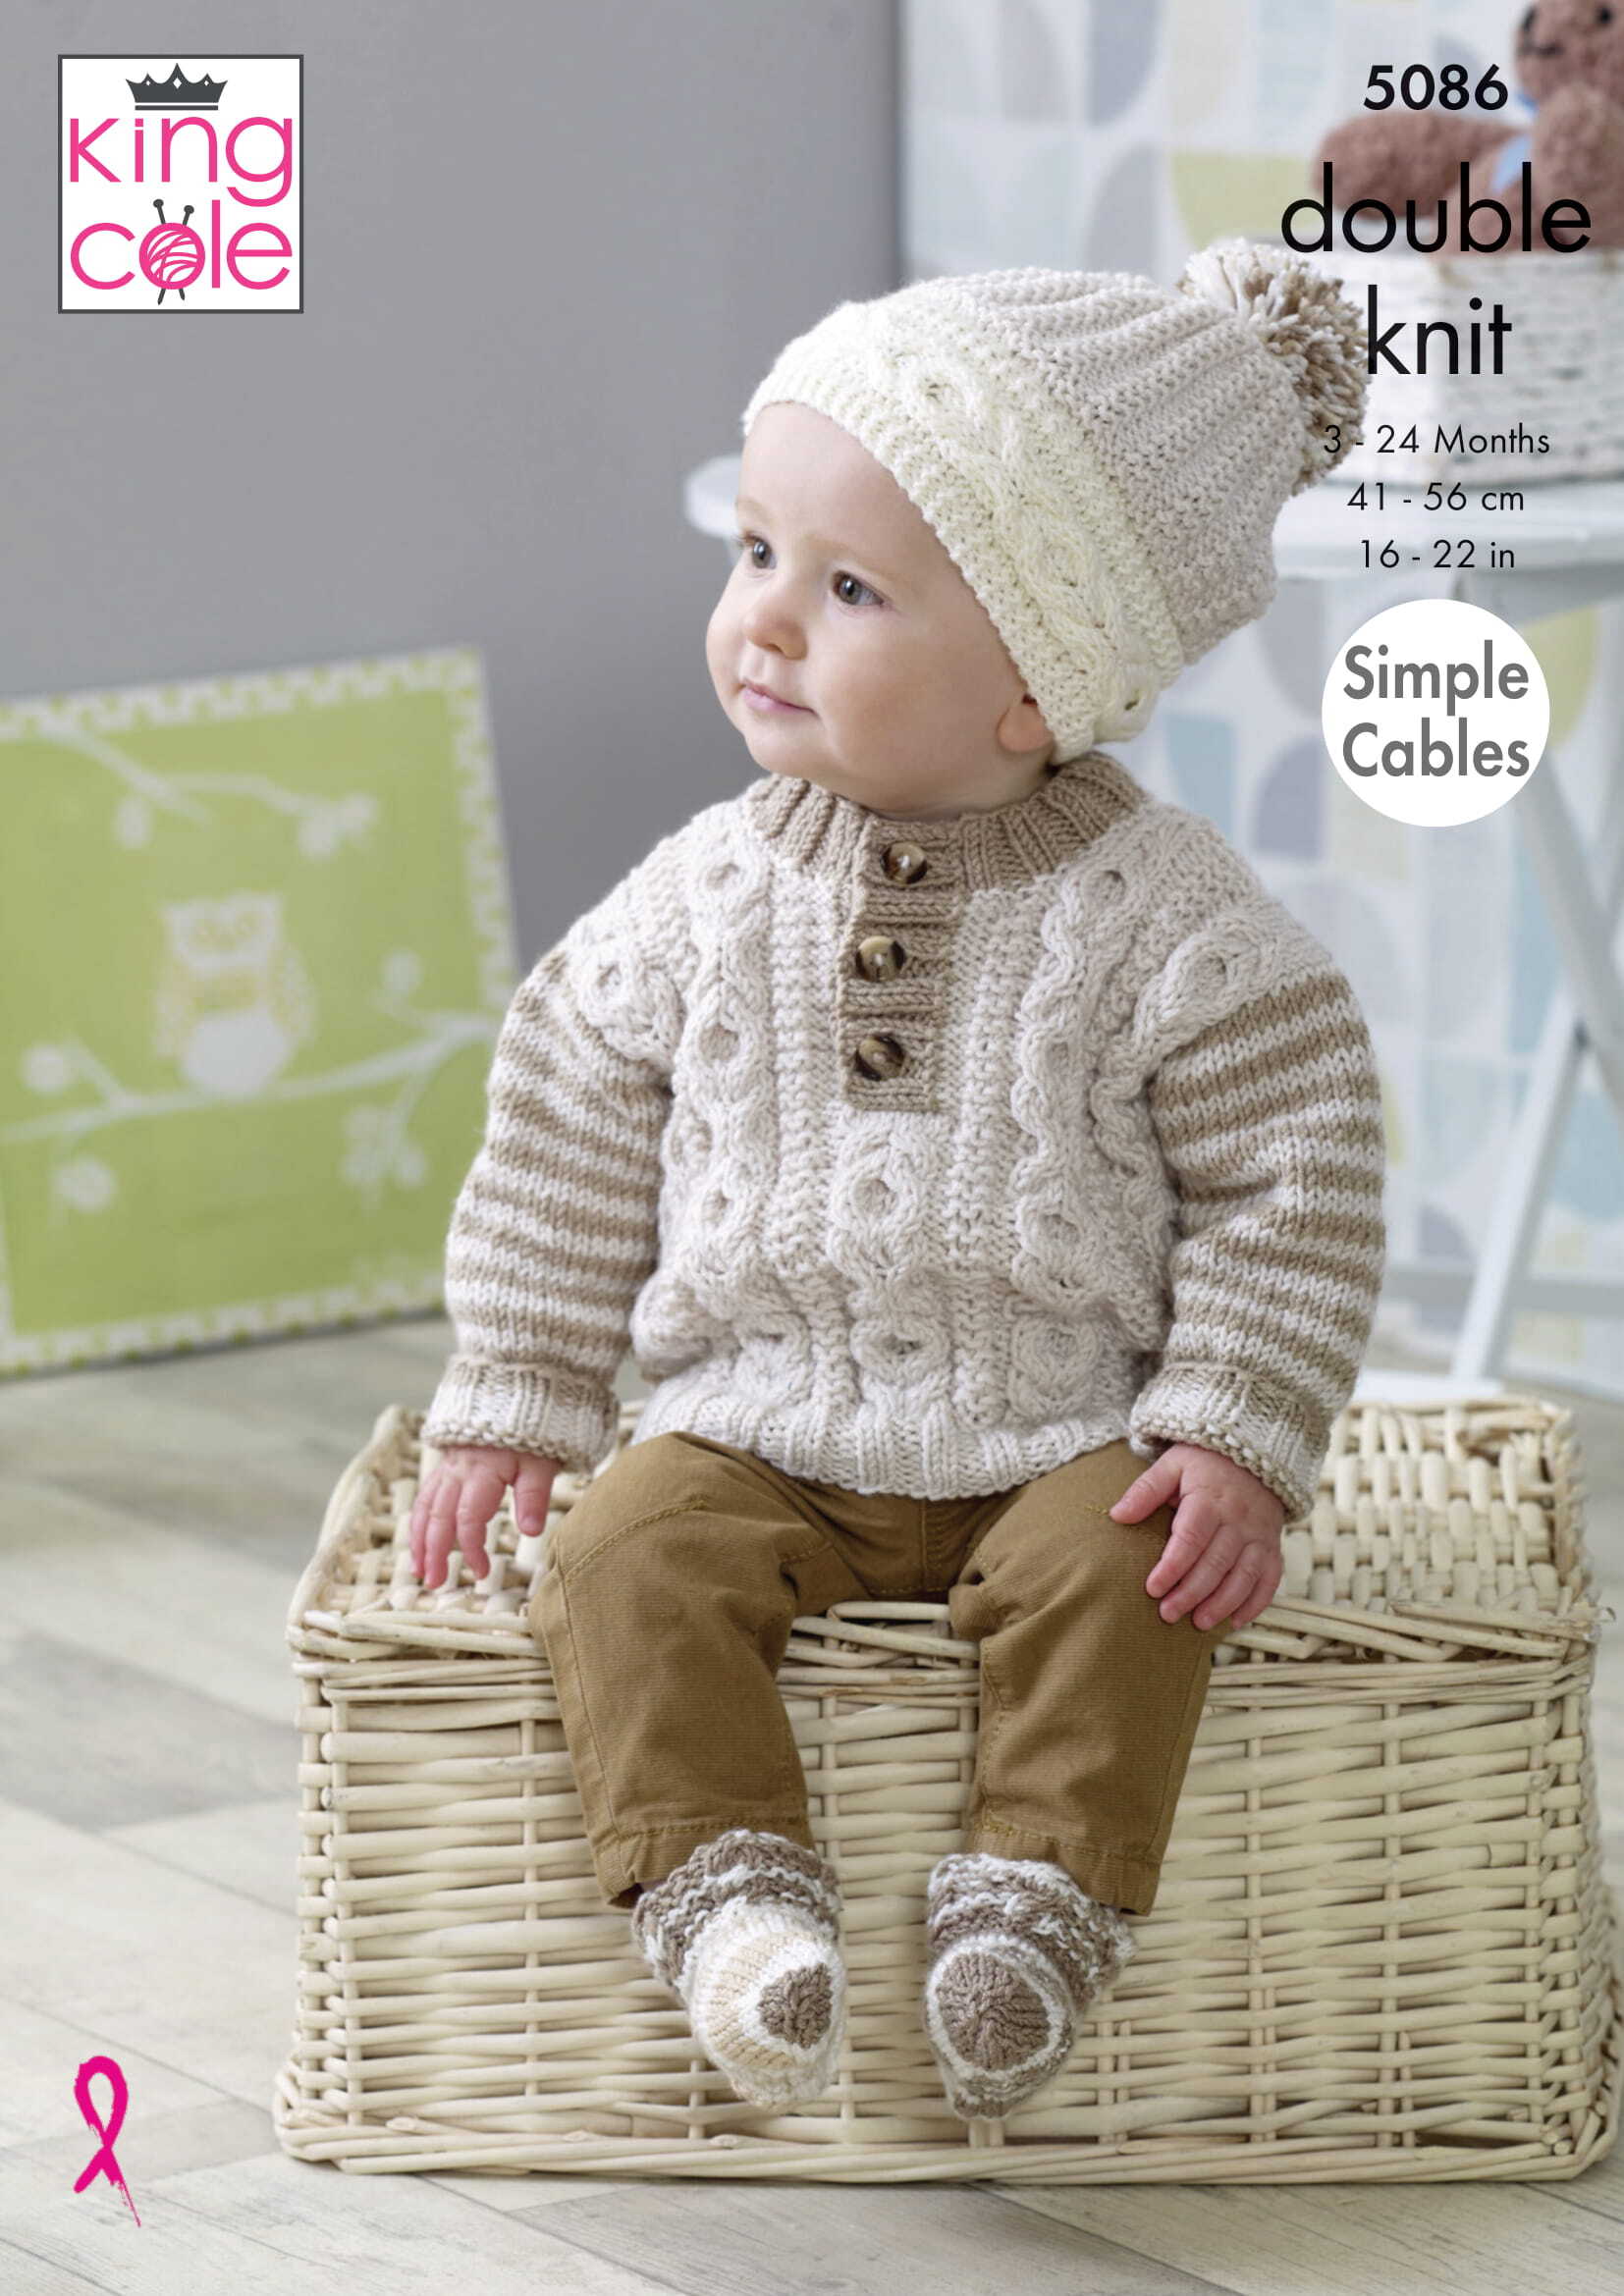 5086 King Cole Baby Double Knitting Pattern Simple Cable Sweaters Hats & Socks